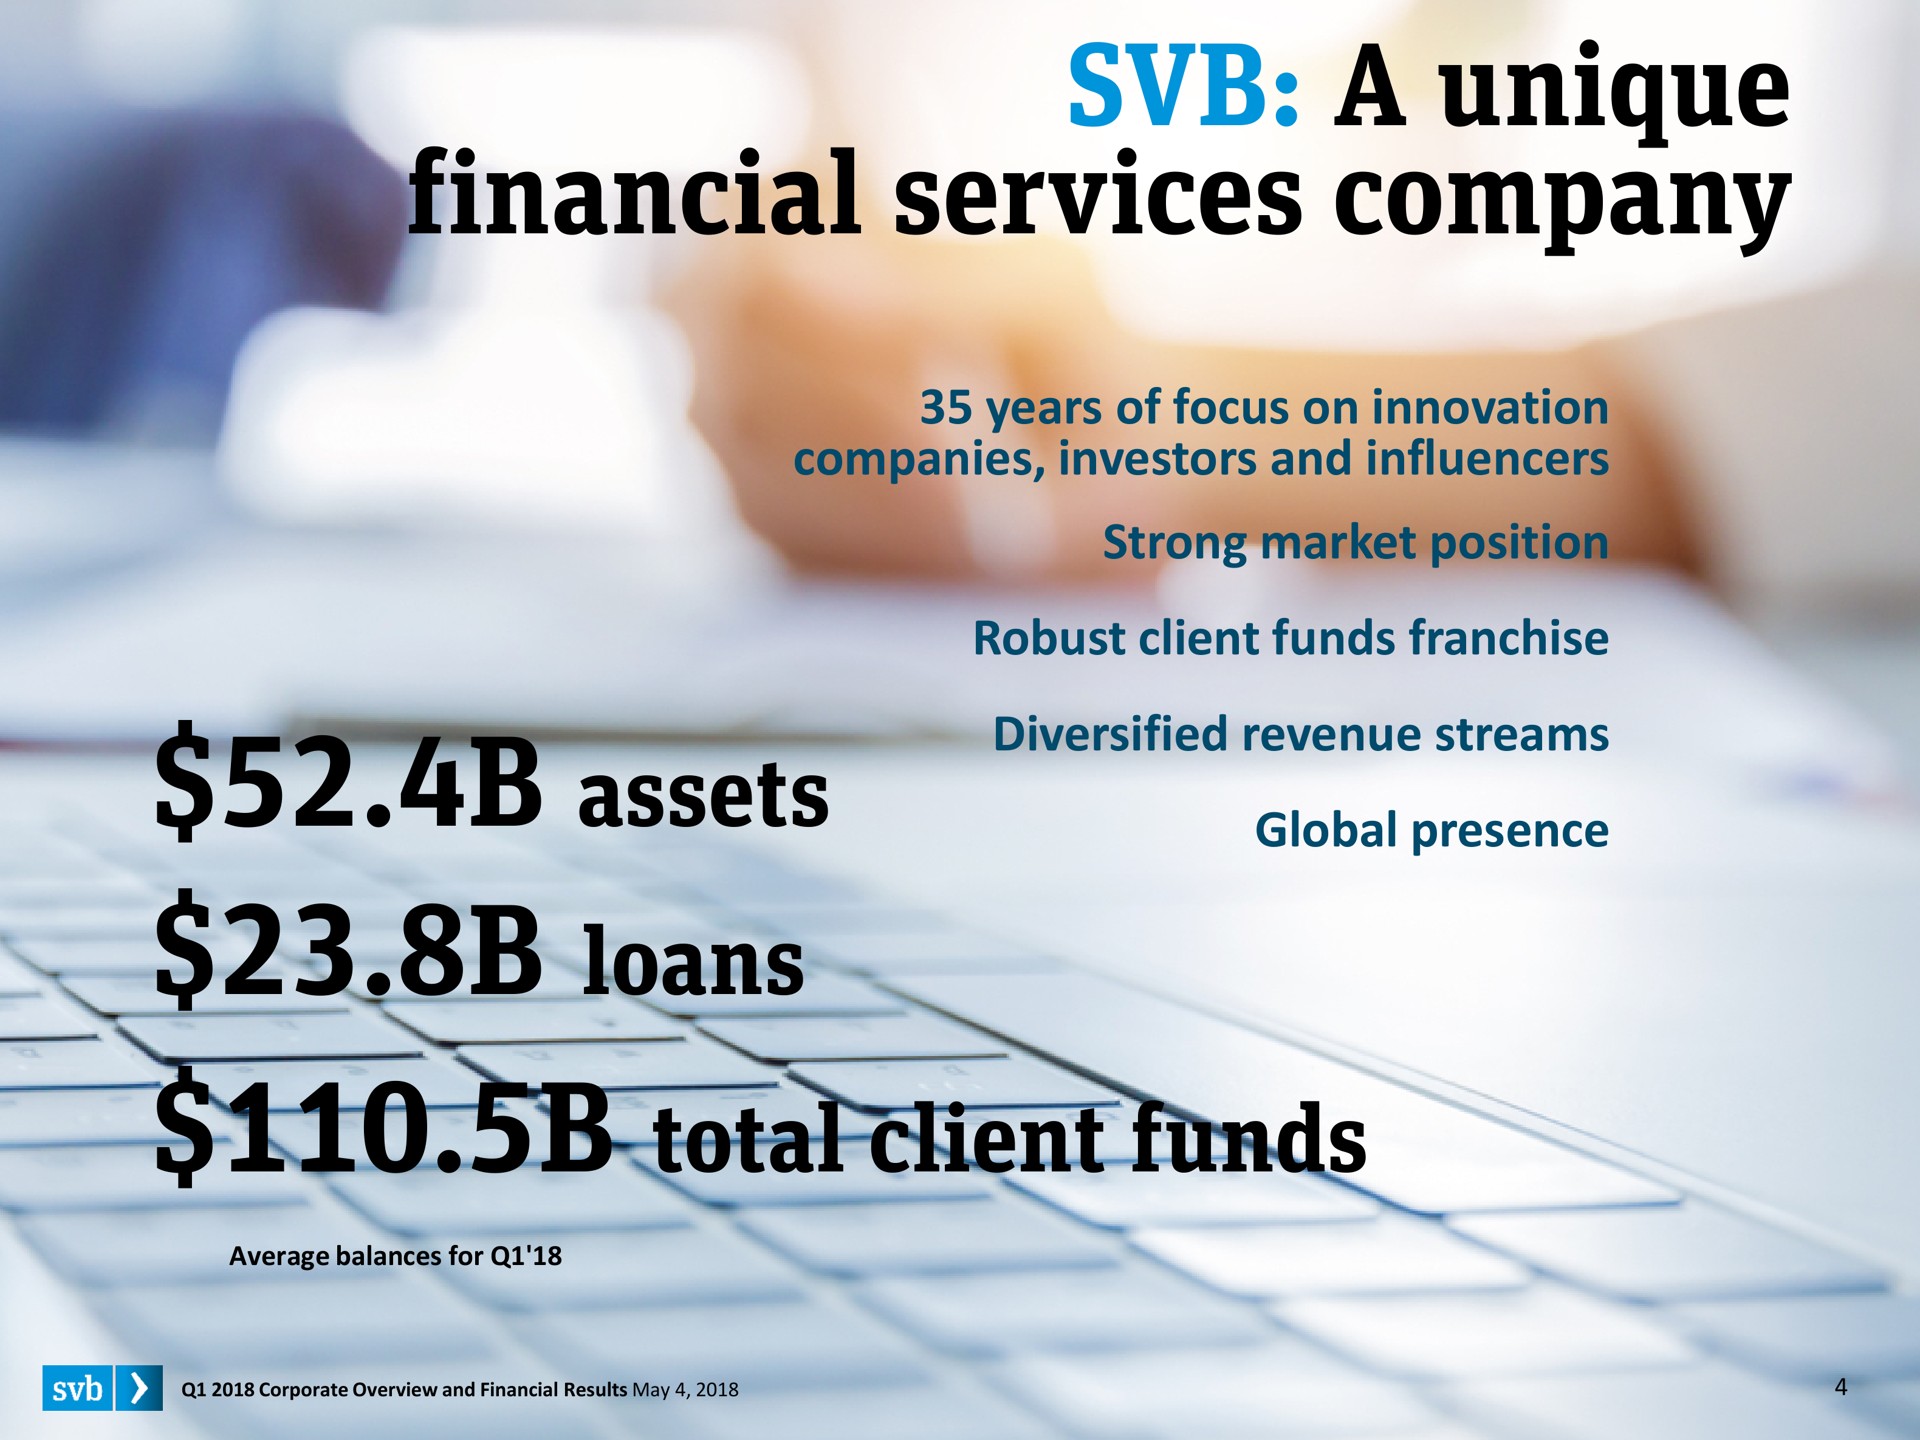 a unique financial services company assets loans total client funds strong market | Silicon Valley Bank